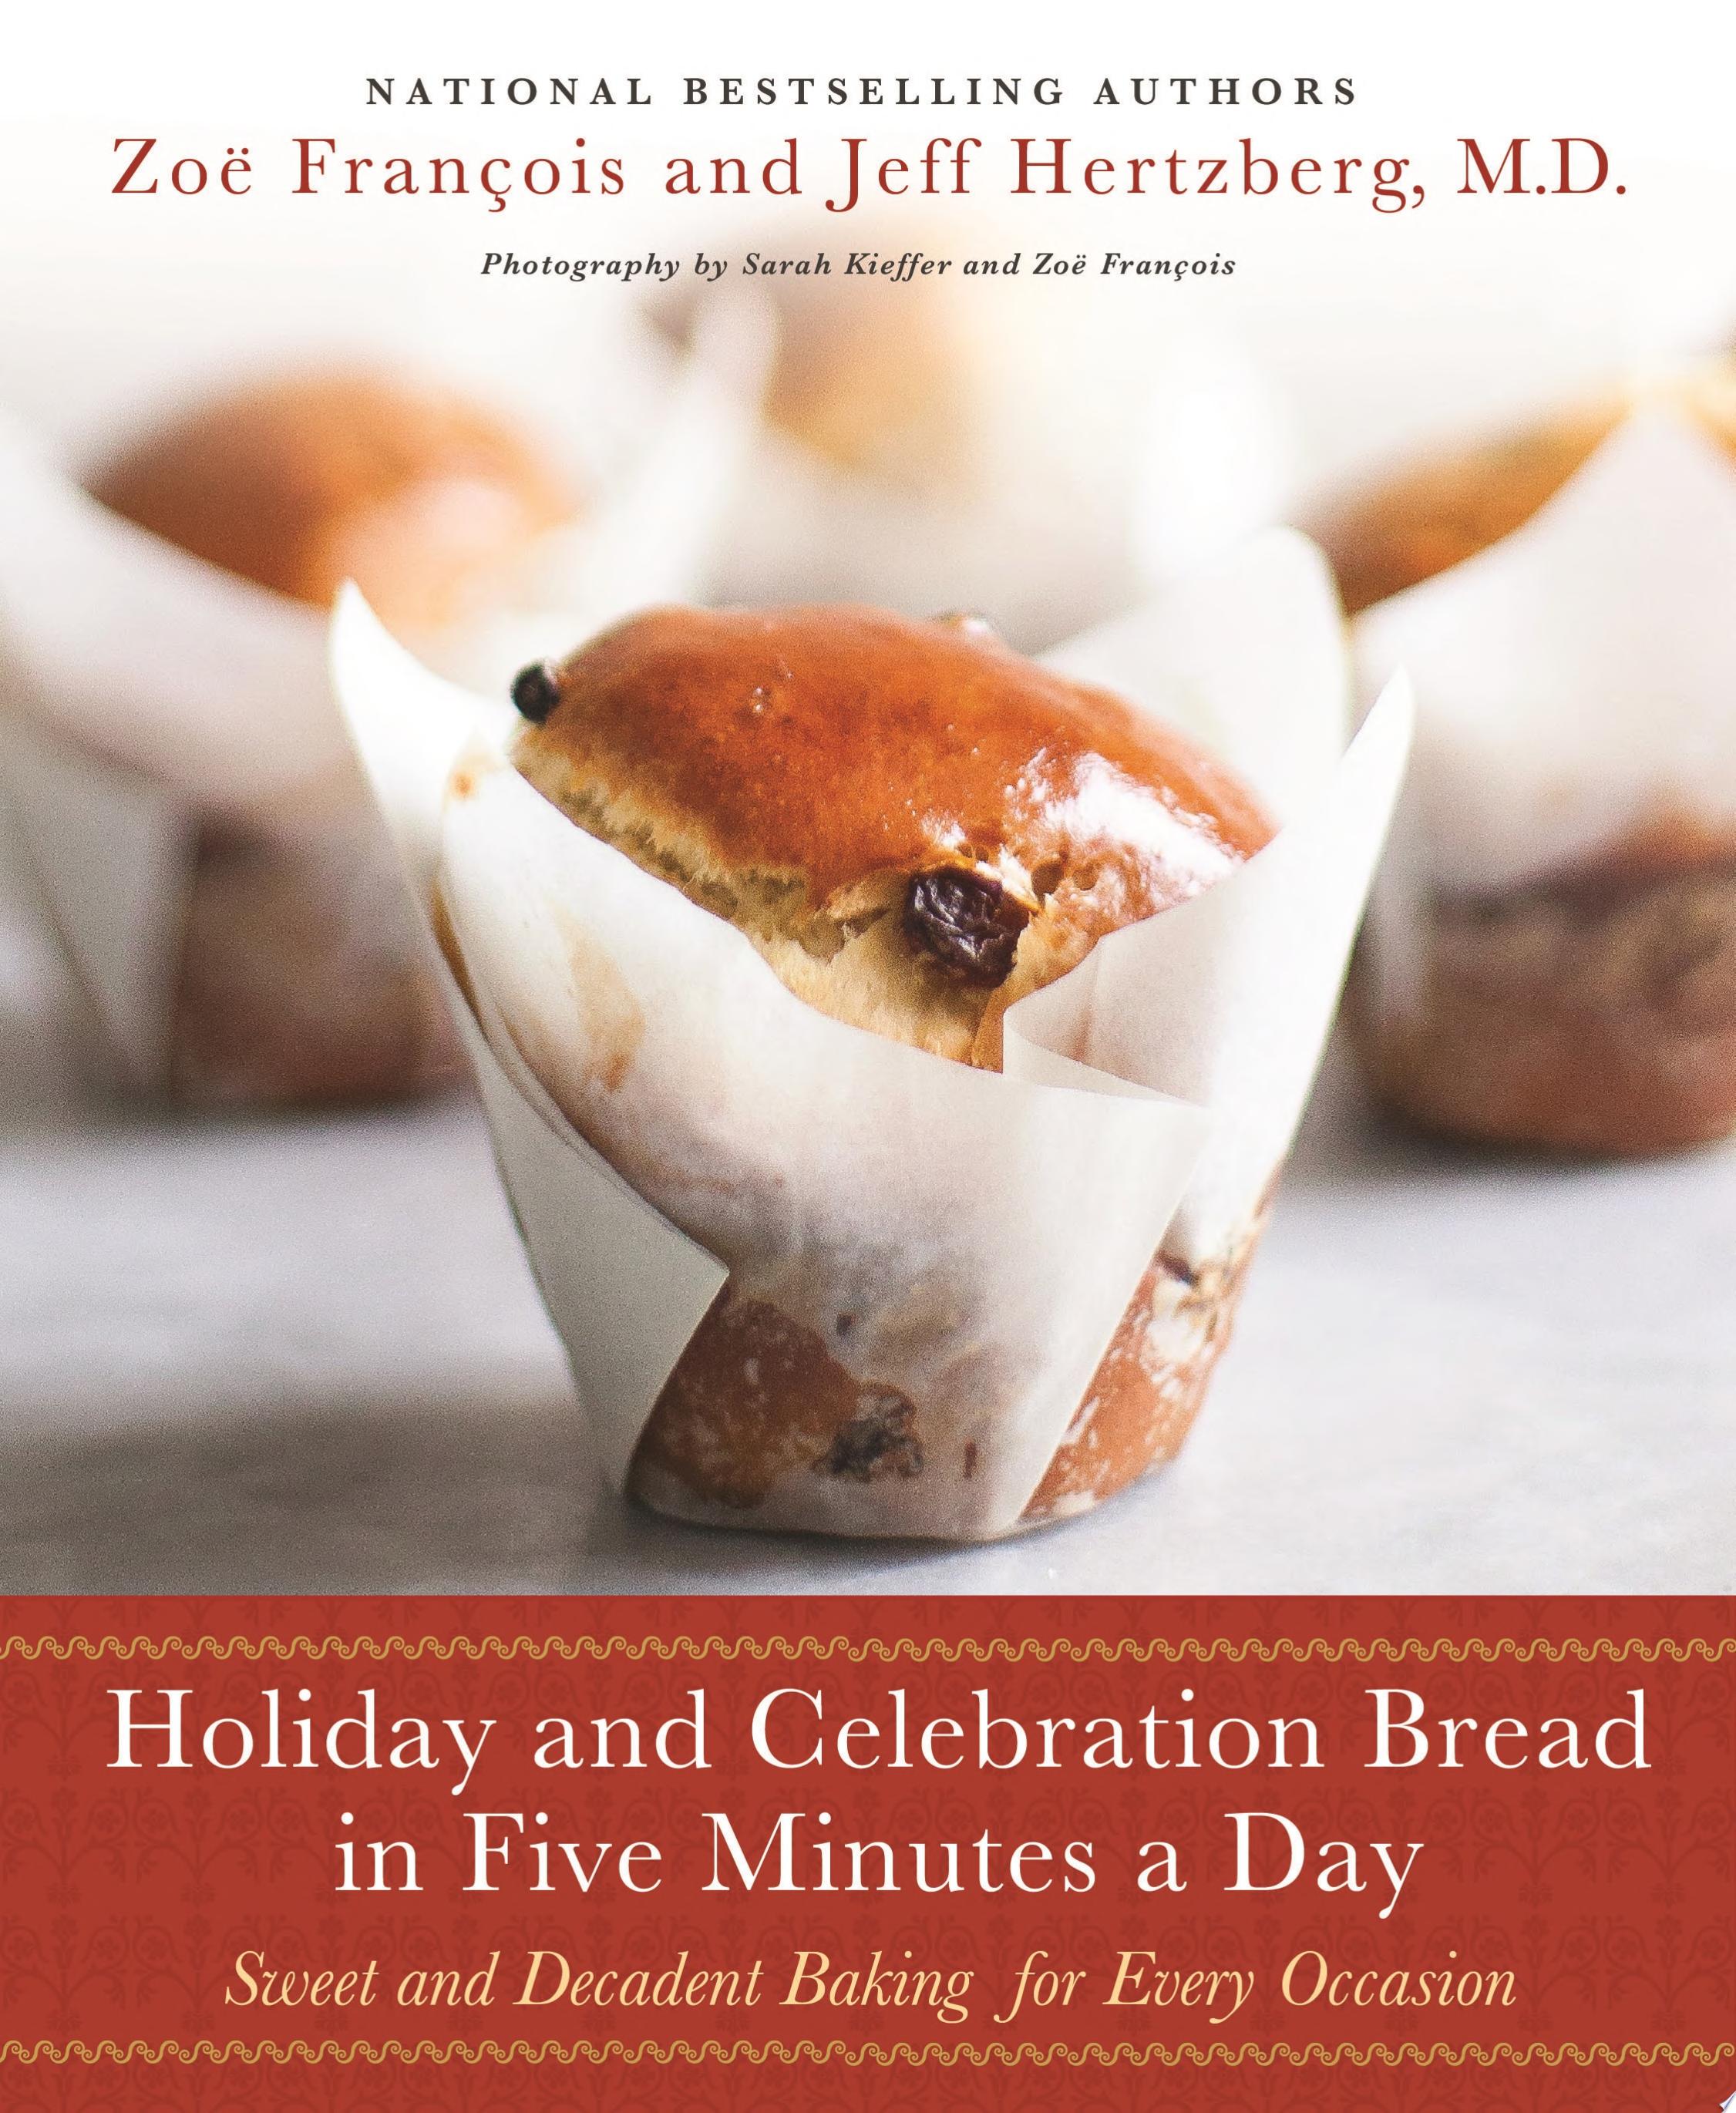 Image for "Holiday and Celebration Bread in Five Minutes a Day"